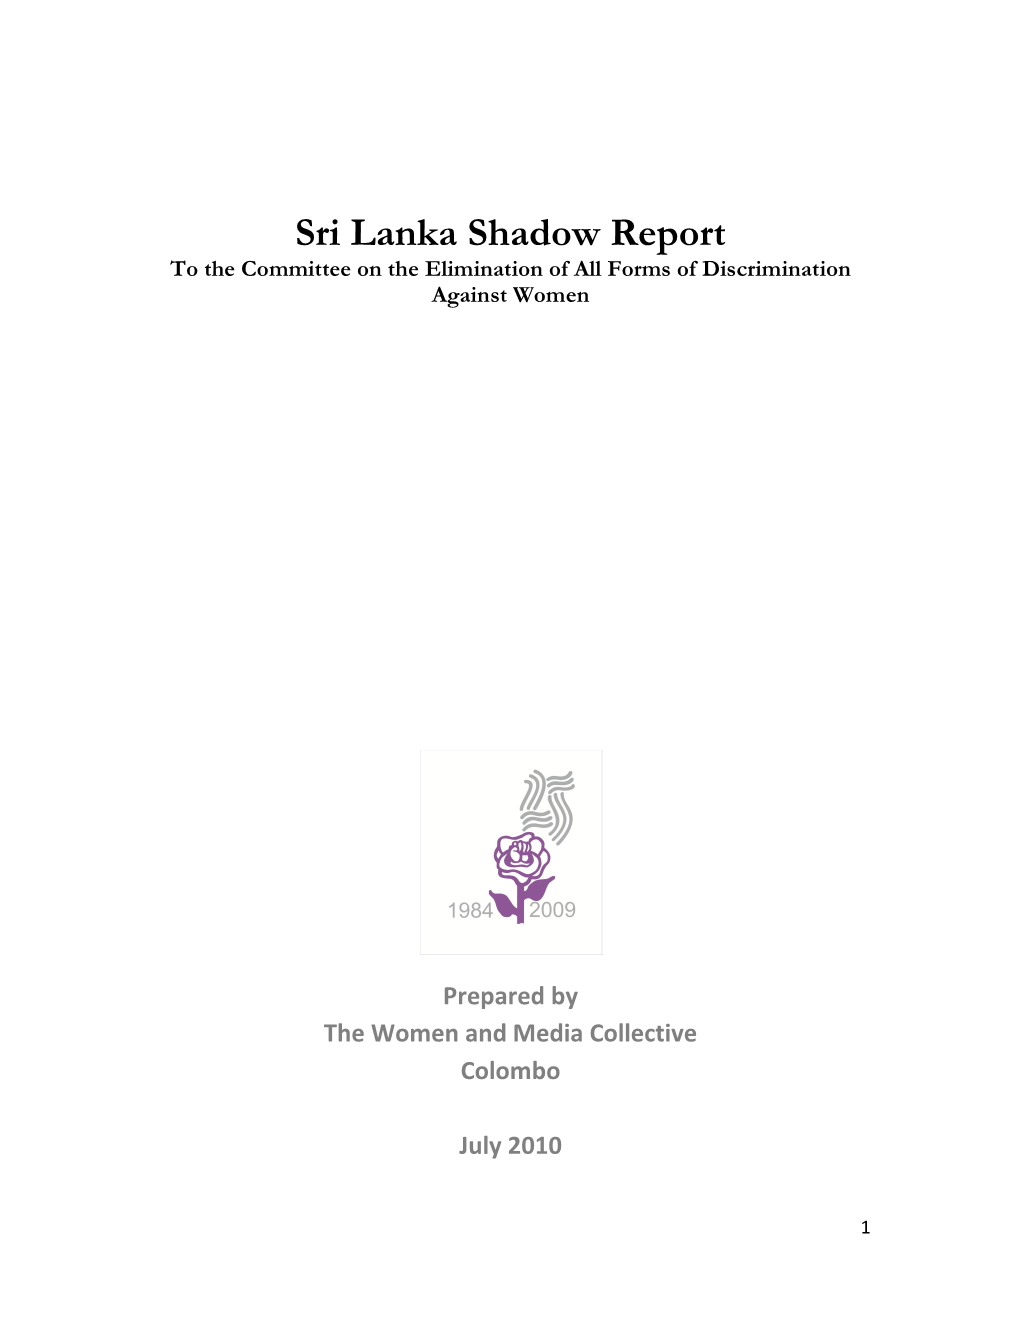 Sri Lanka Shadow Report to the Committee on the Elimination of All Forms of Discrimination Against Women